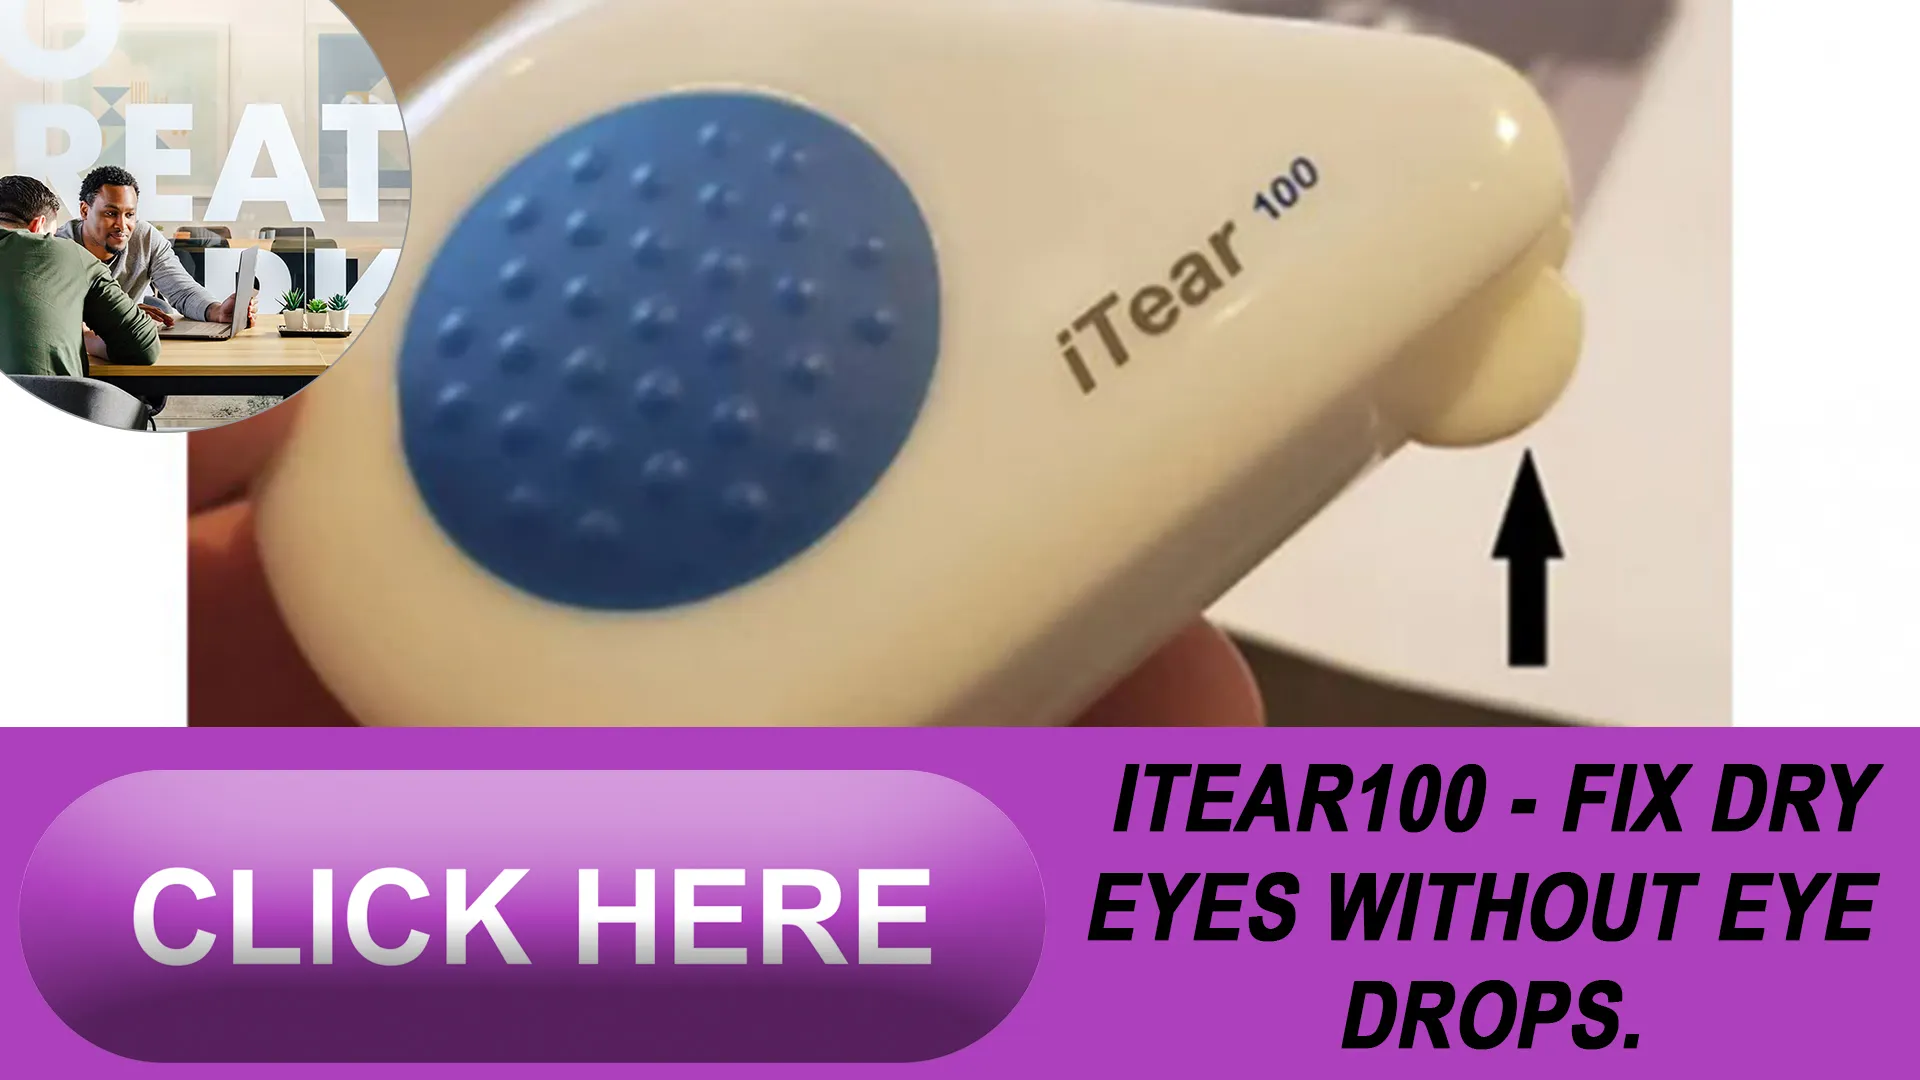 Introducing the iTEAR100: A Drug-Free Solution